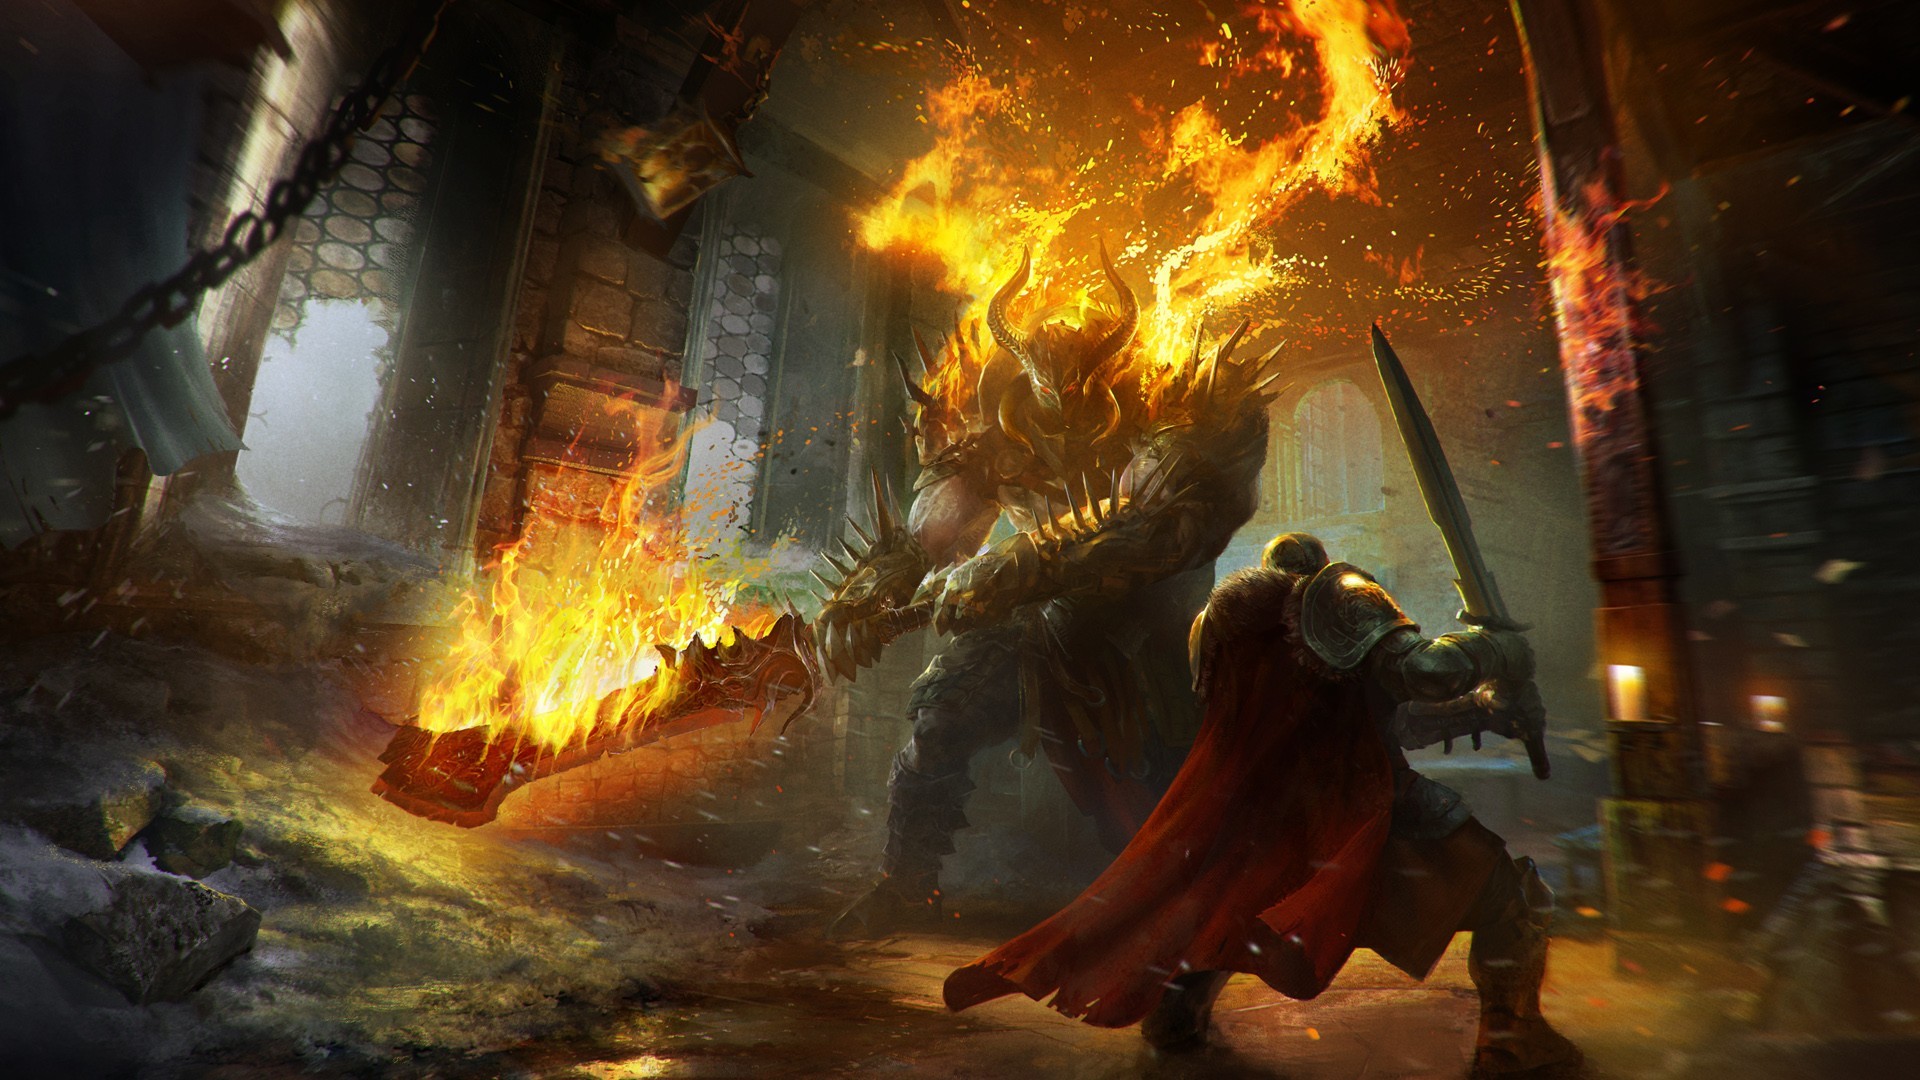 lords_of_the_fallen_game_concept-1920x1080.jpg